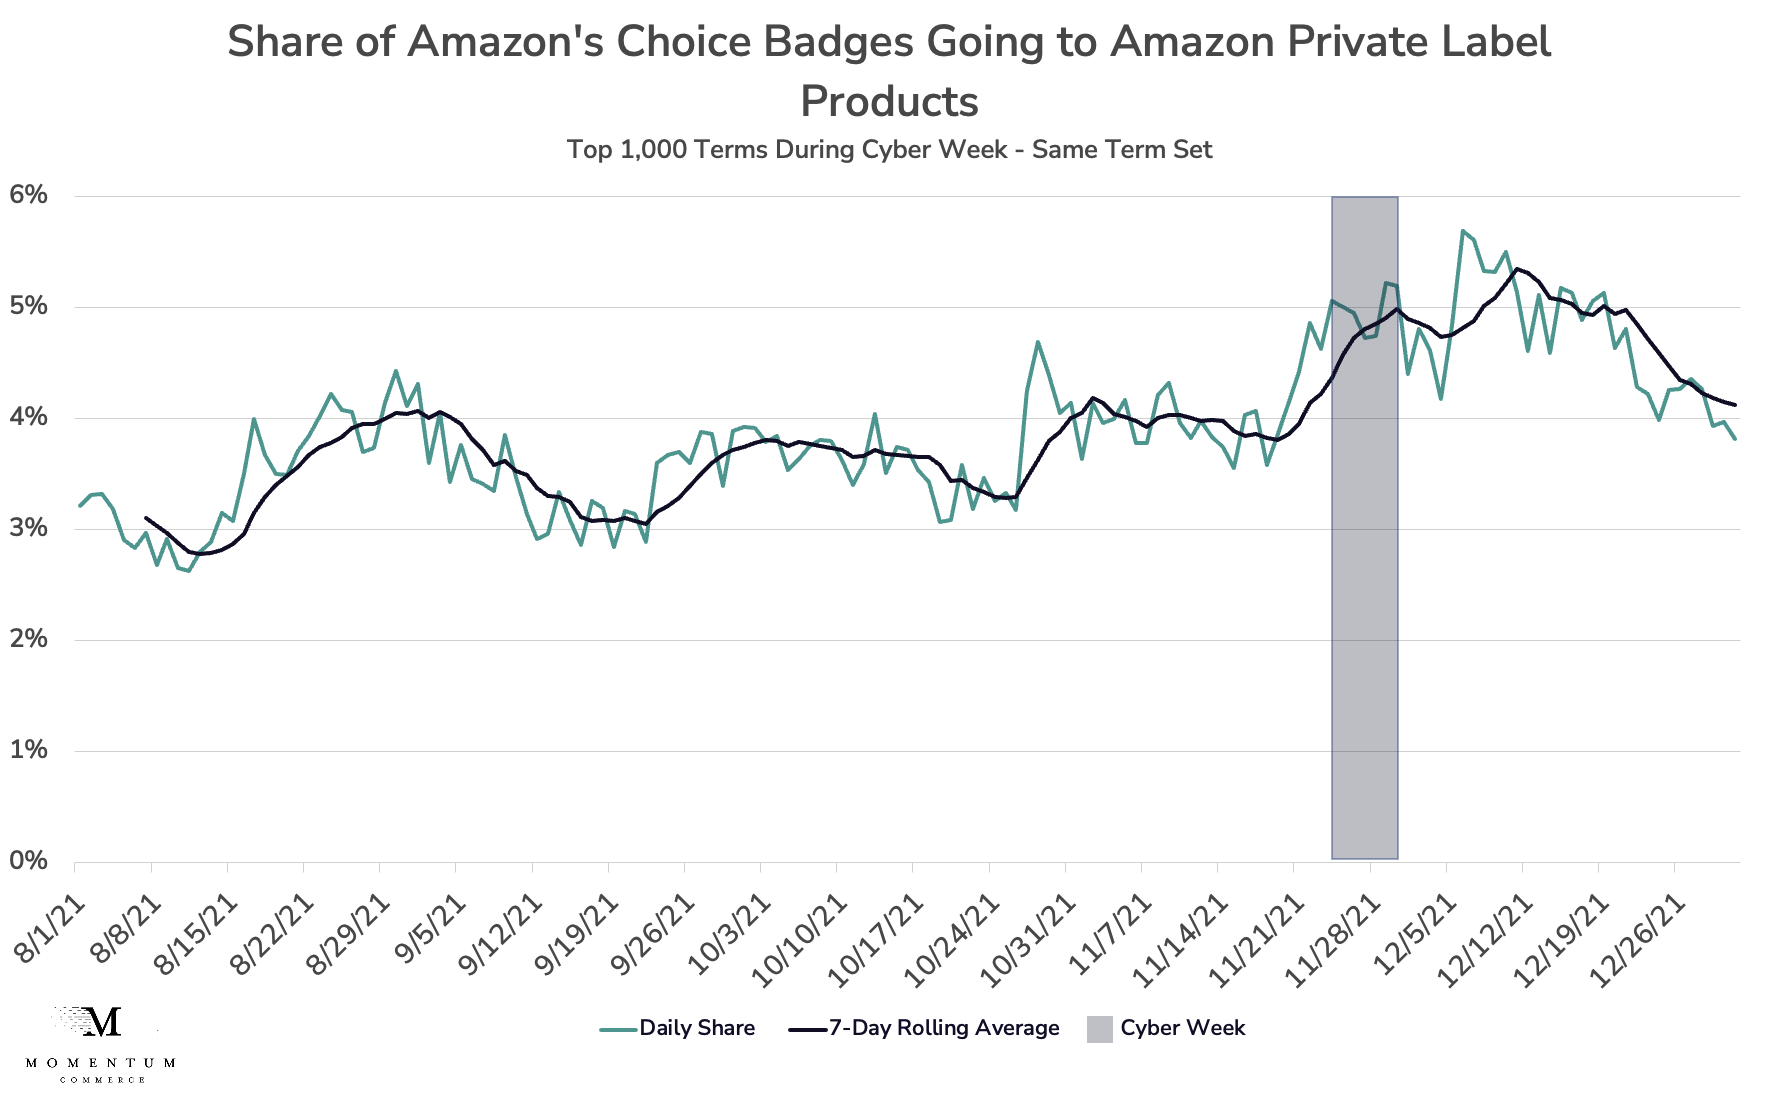 Share of Amazon's Choice Badges Going to Amazon Private Label Products